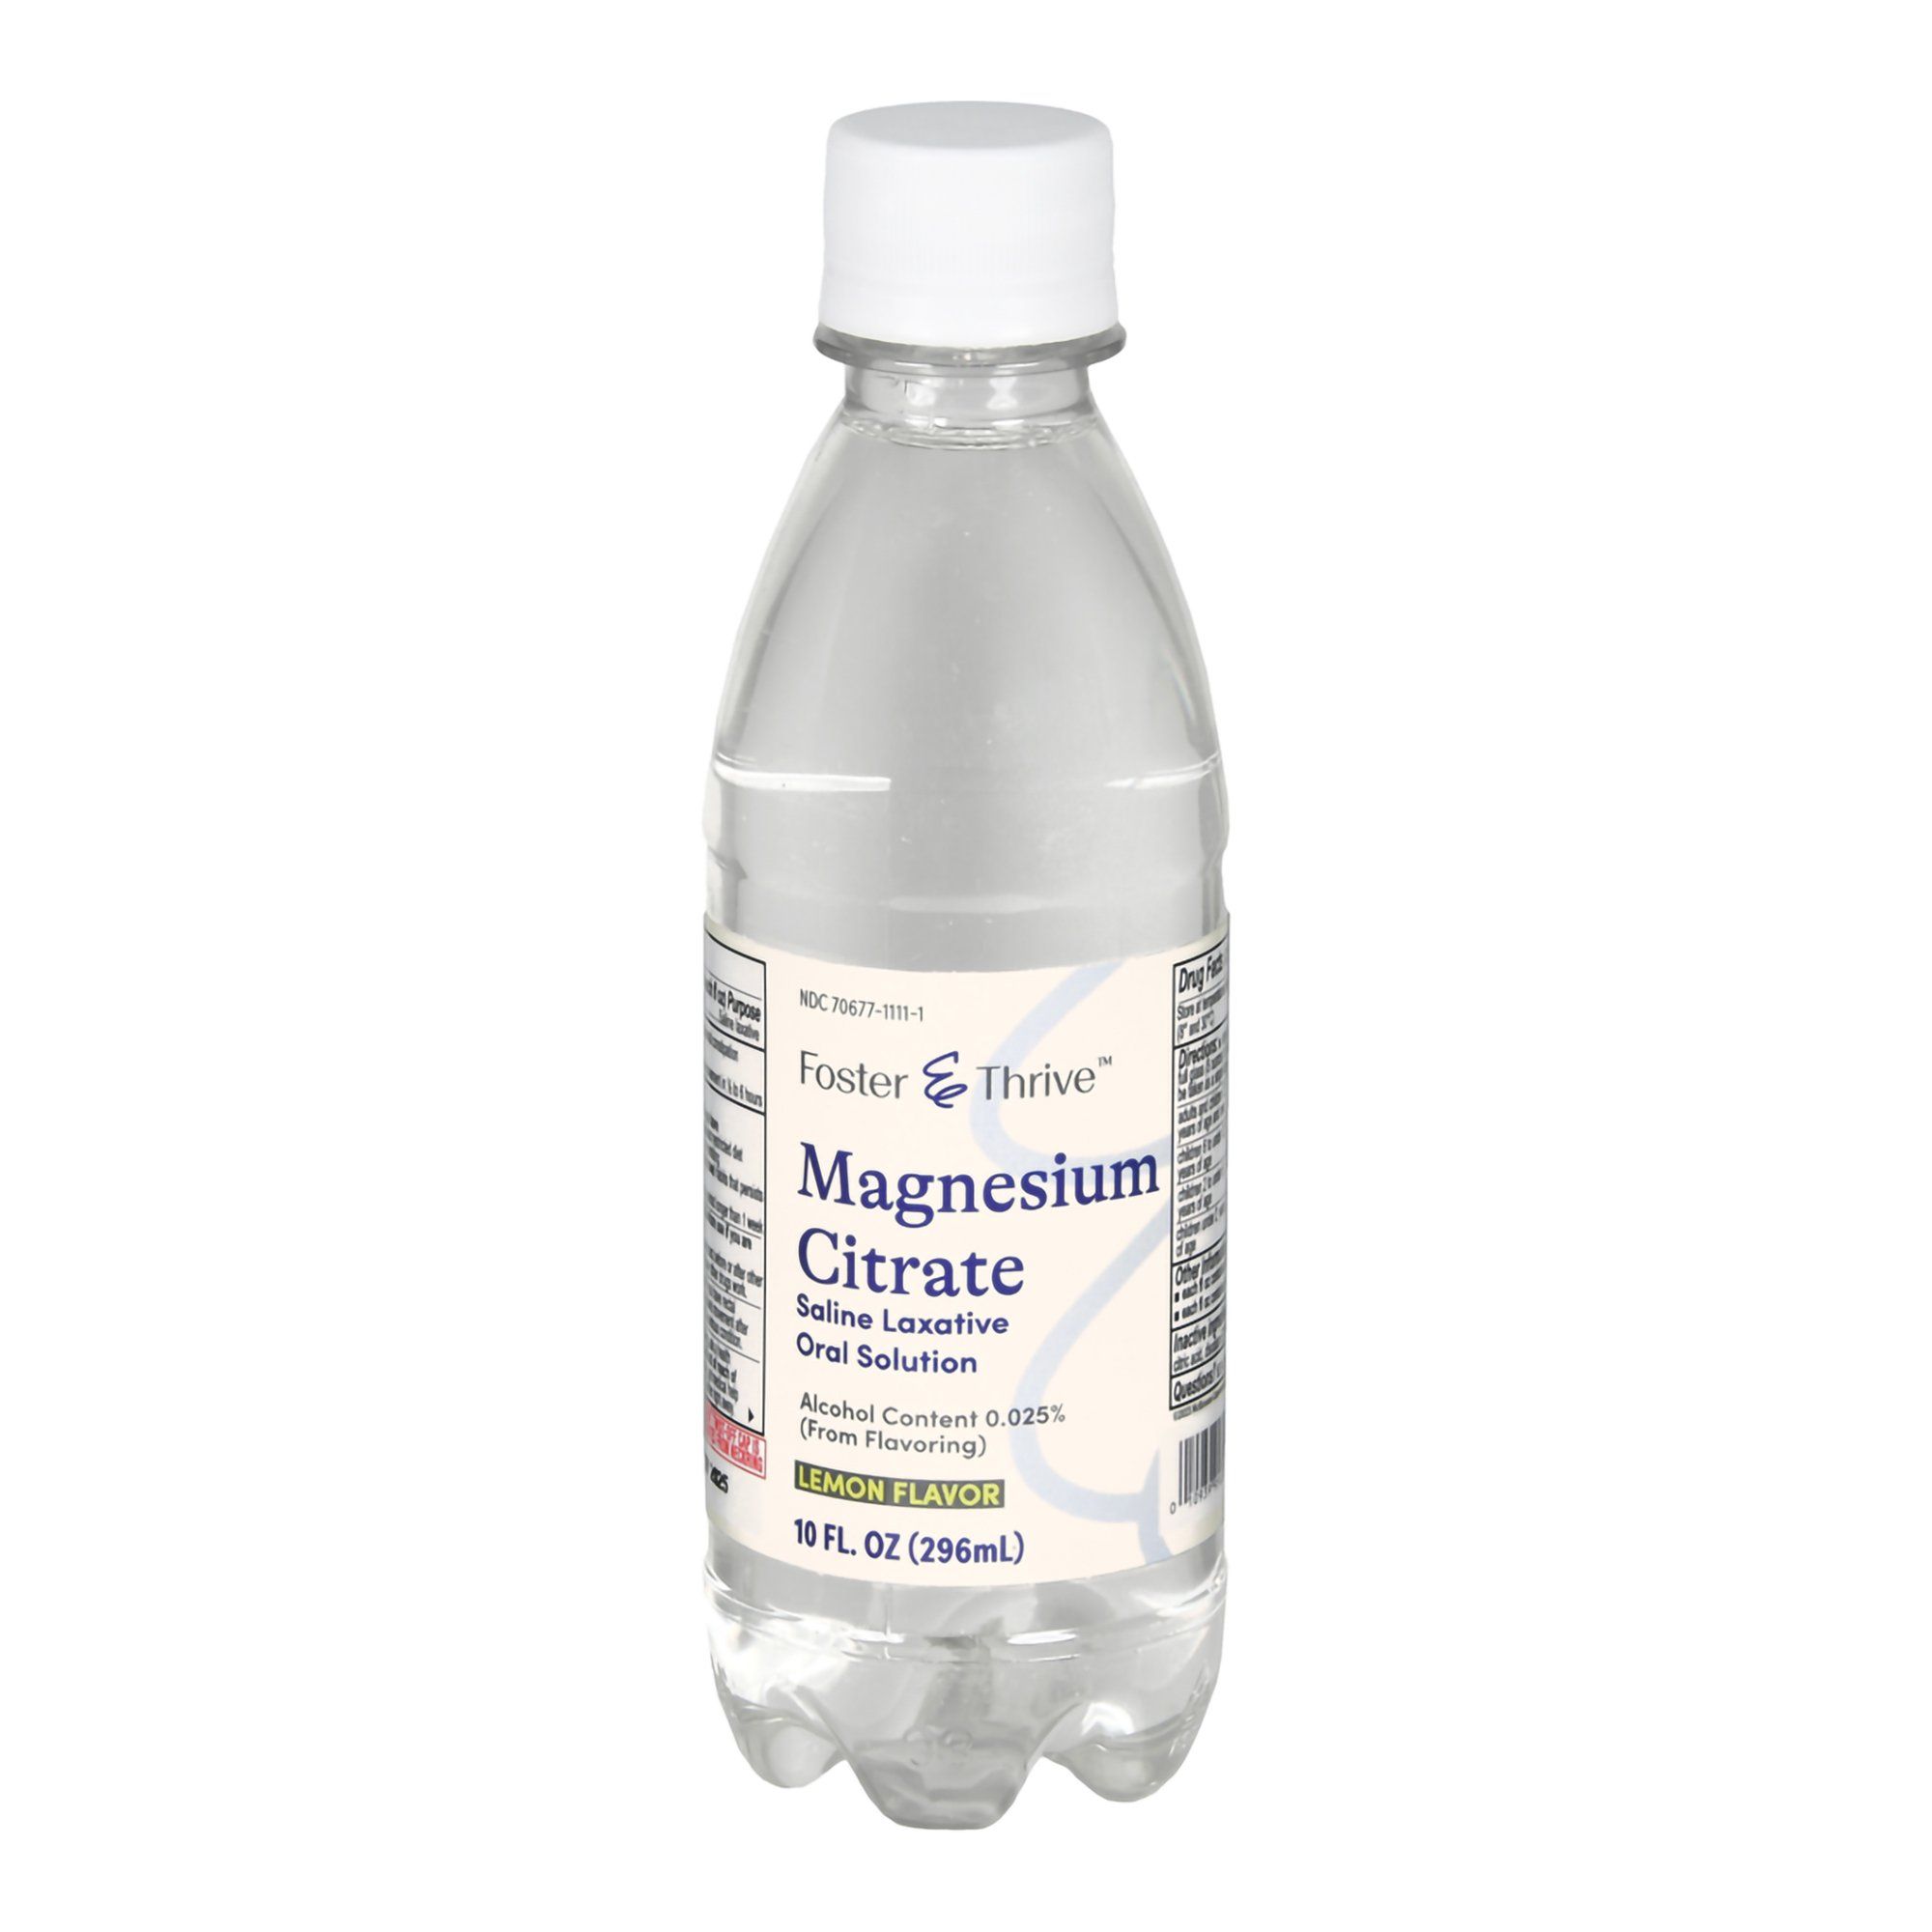 Foster & Thrive Magnesium Citrate Saline Laxative Oral Solution, Lemon - 10 fl oz